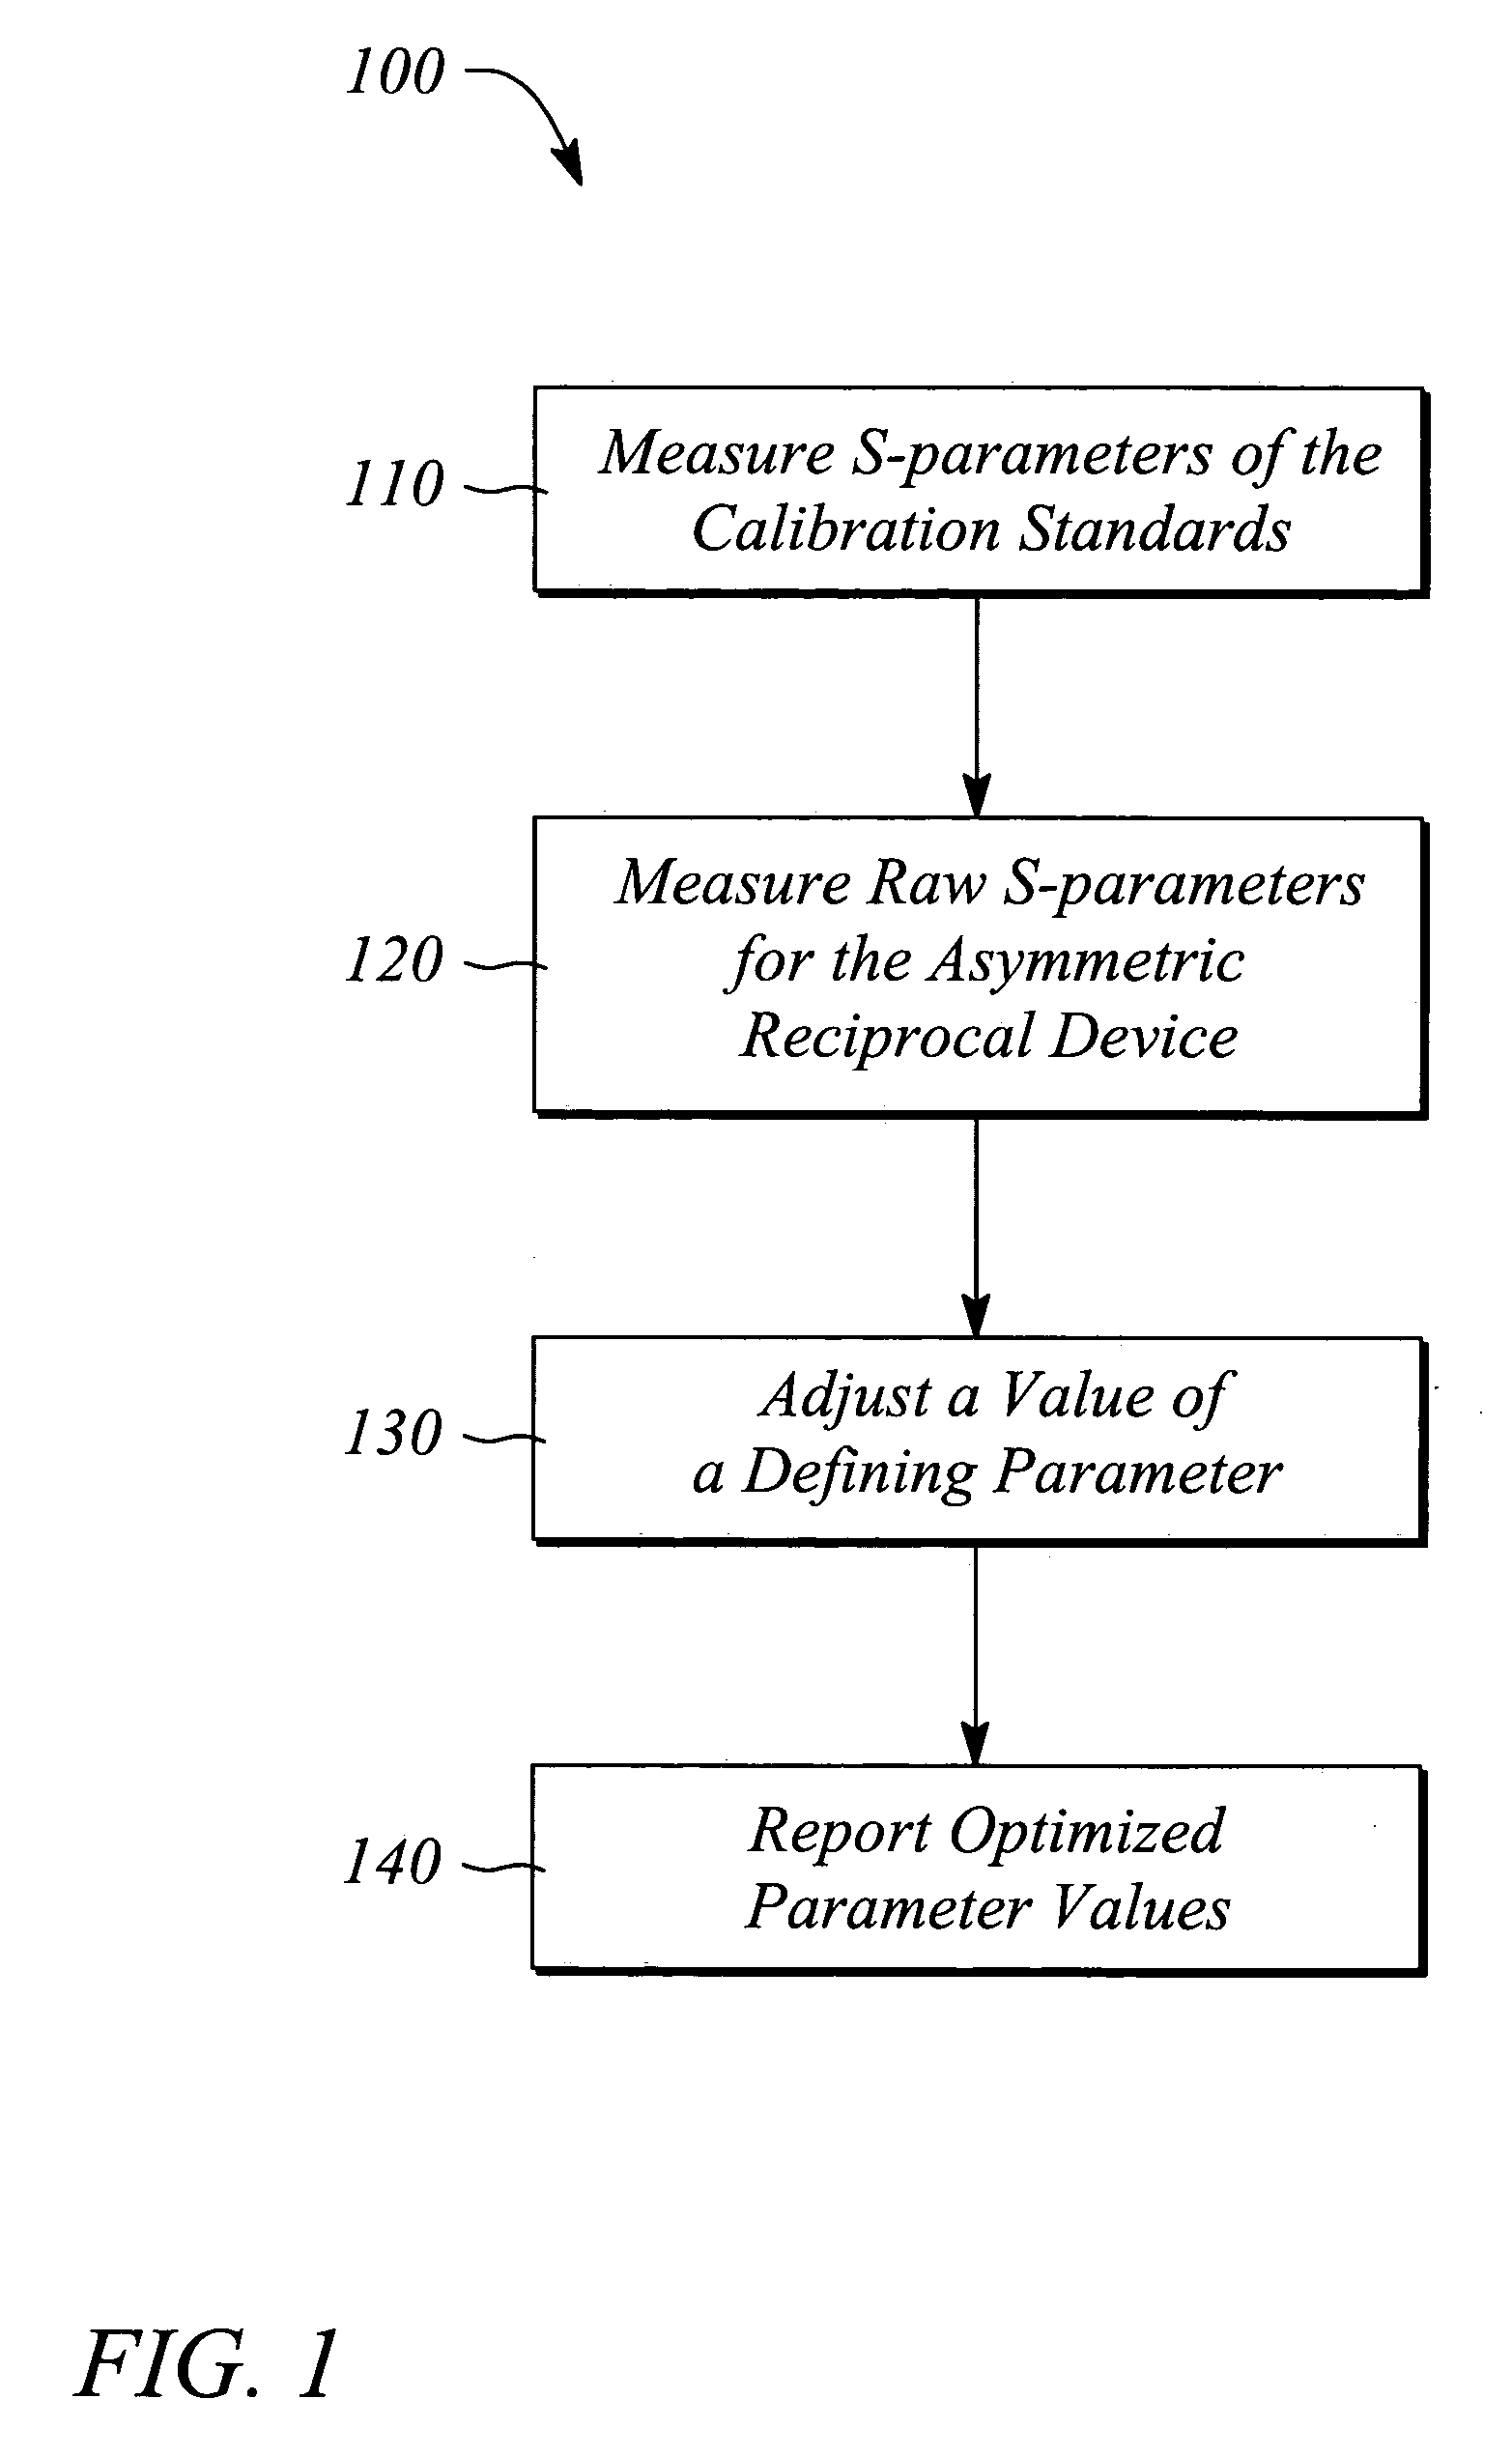 Multiport network analyzer calibration employing reciprocity of a device